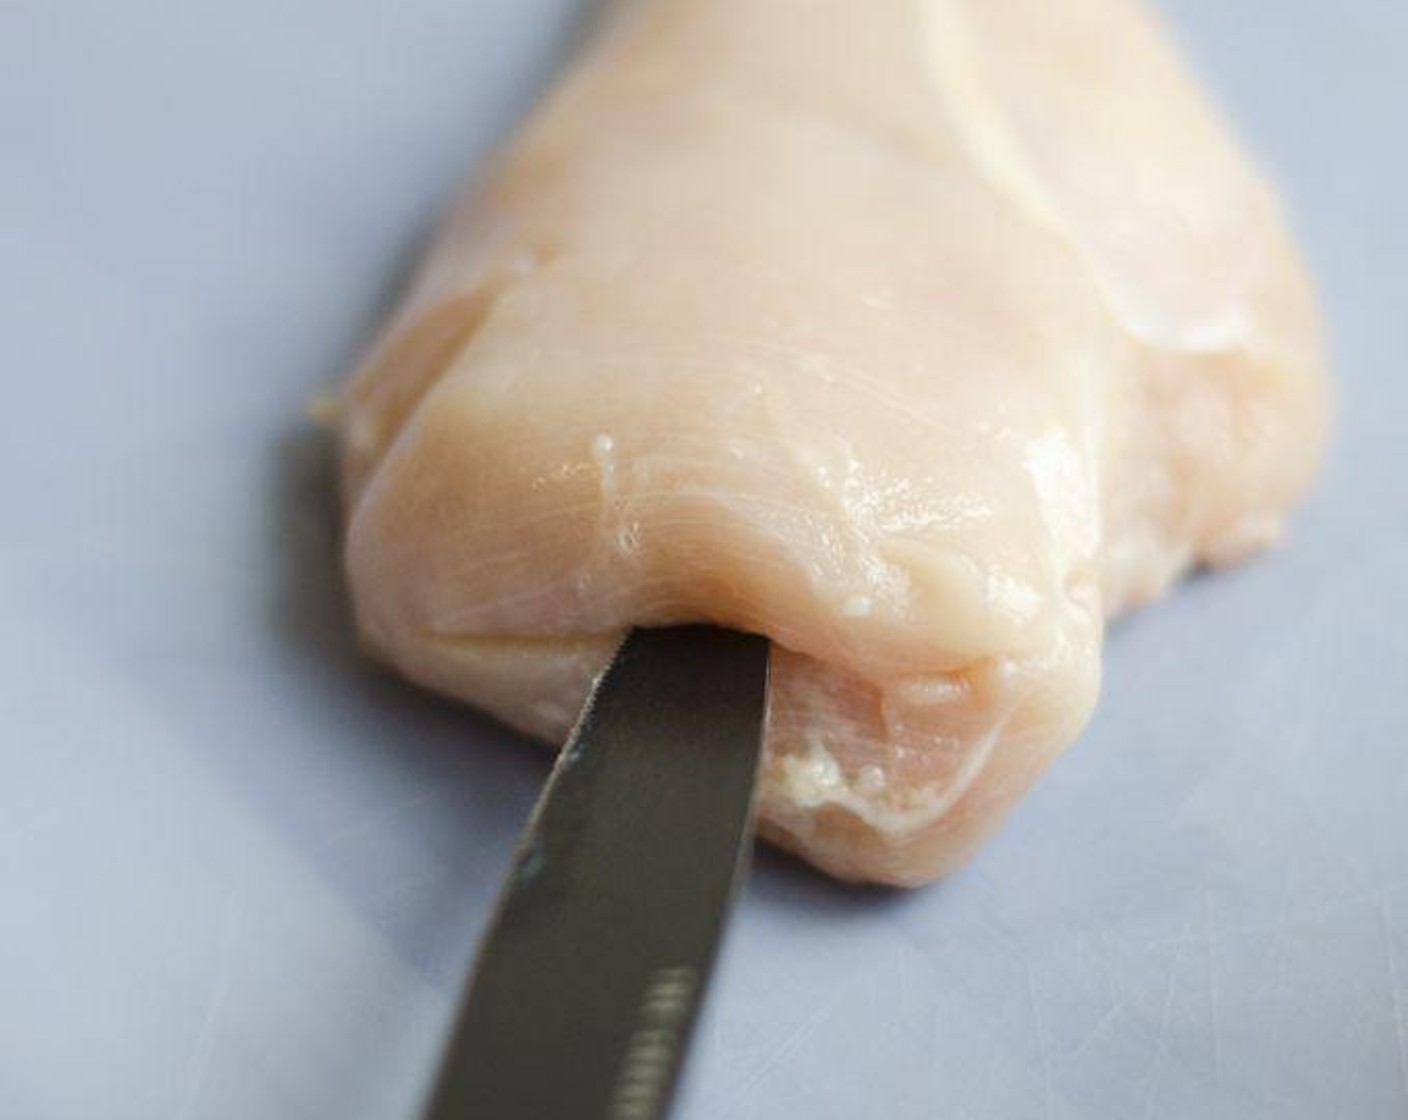 step 1 Place one Boneless, Skinless Chicken Breasts (4) on cutting board, with one hand on top of chicken, parallel to cutting board. Insert knife 4 inches into middle of breast widthwise, and make a 2-inch wide pocket. Repeat for each chicken breast.